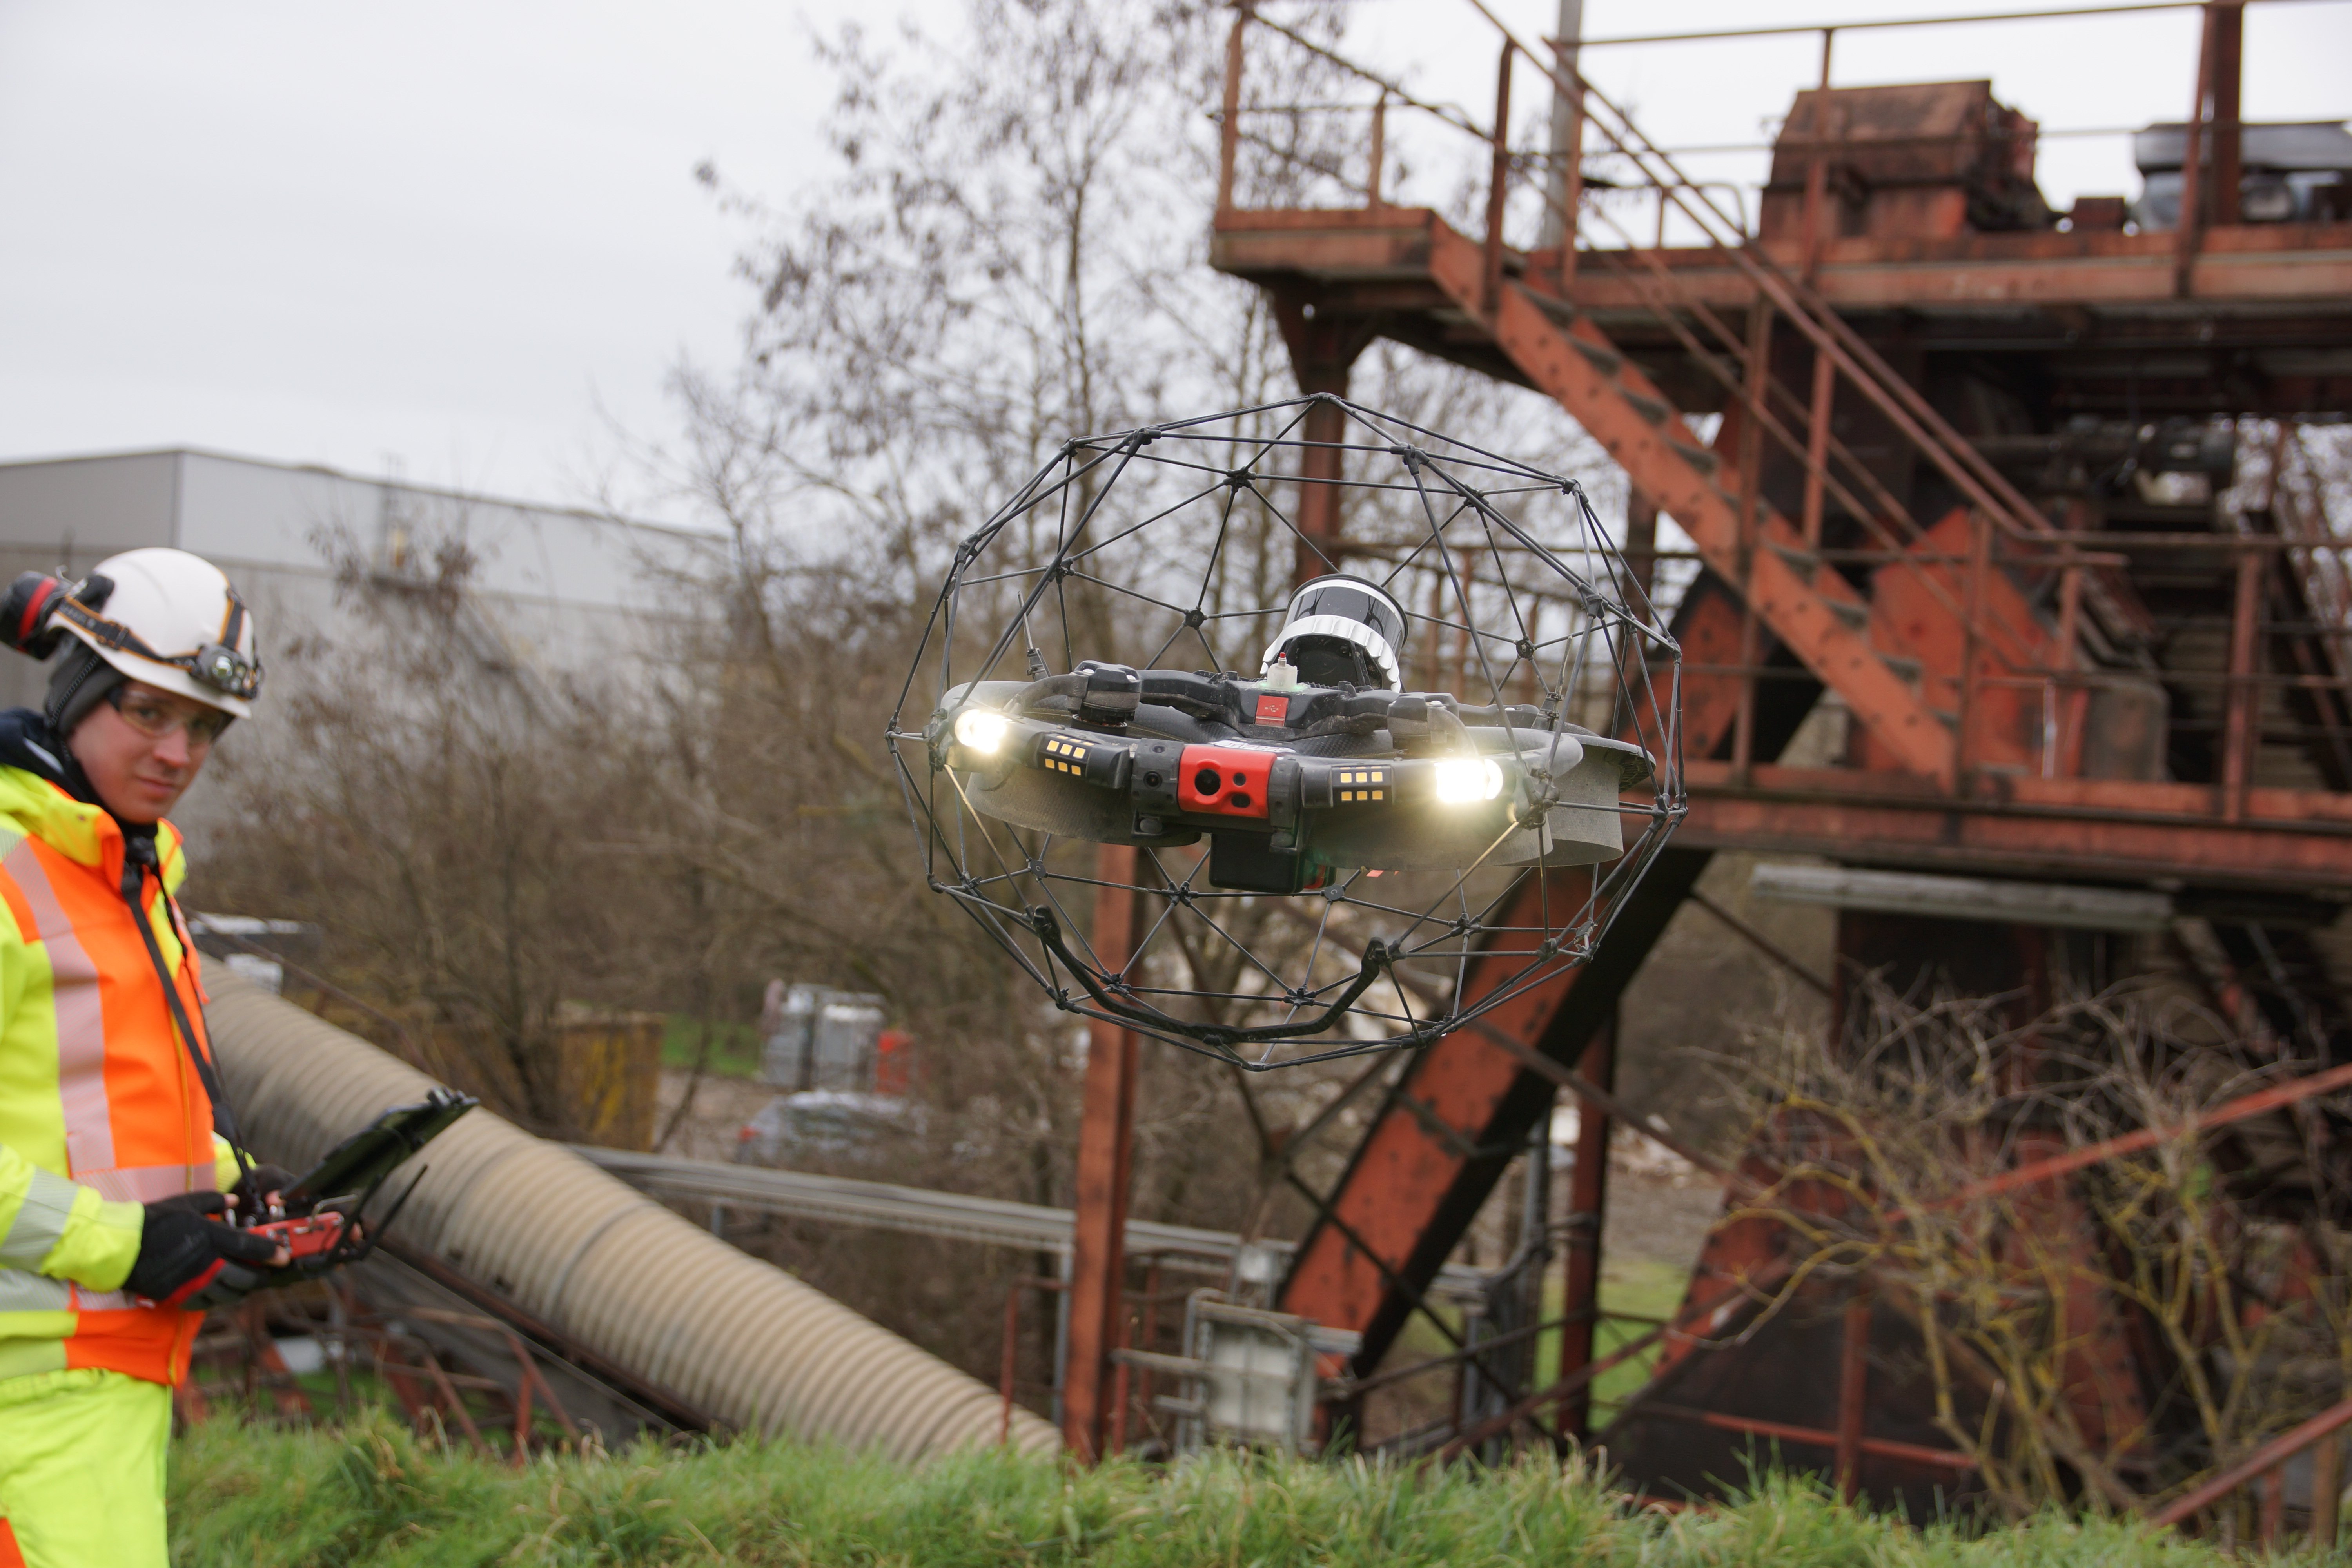 Using the Elios 3 drone to monitor stockpiles at a cement plant